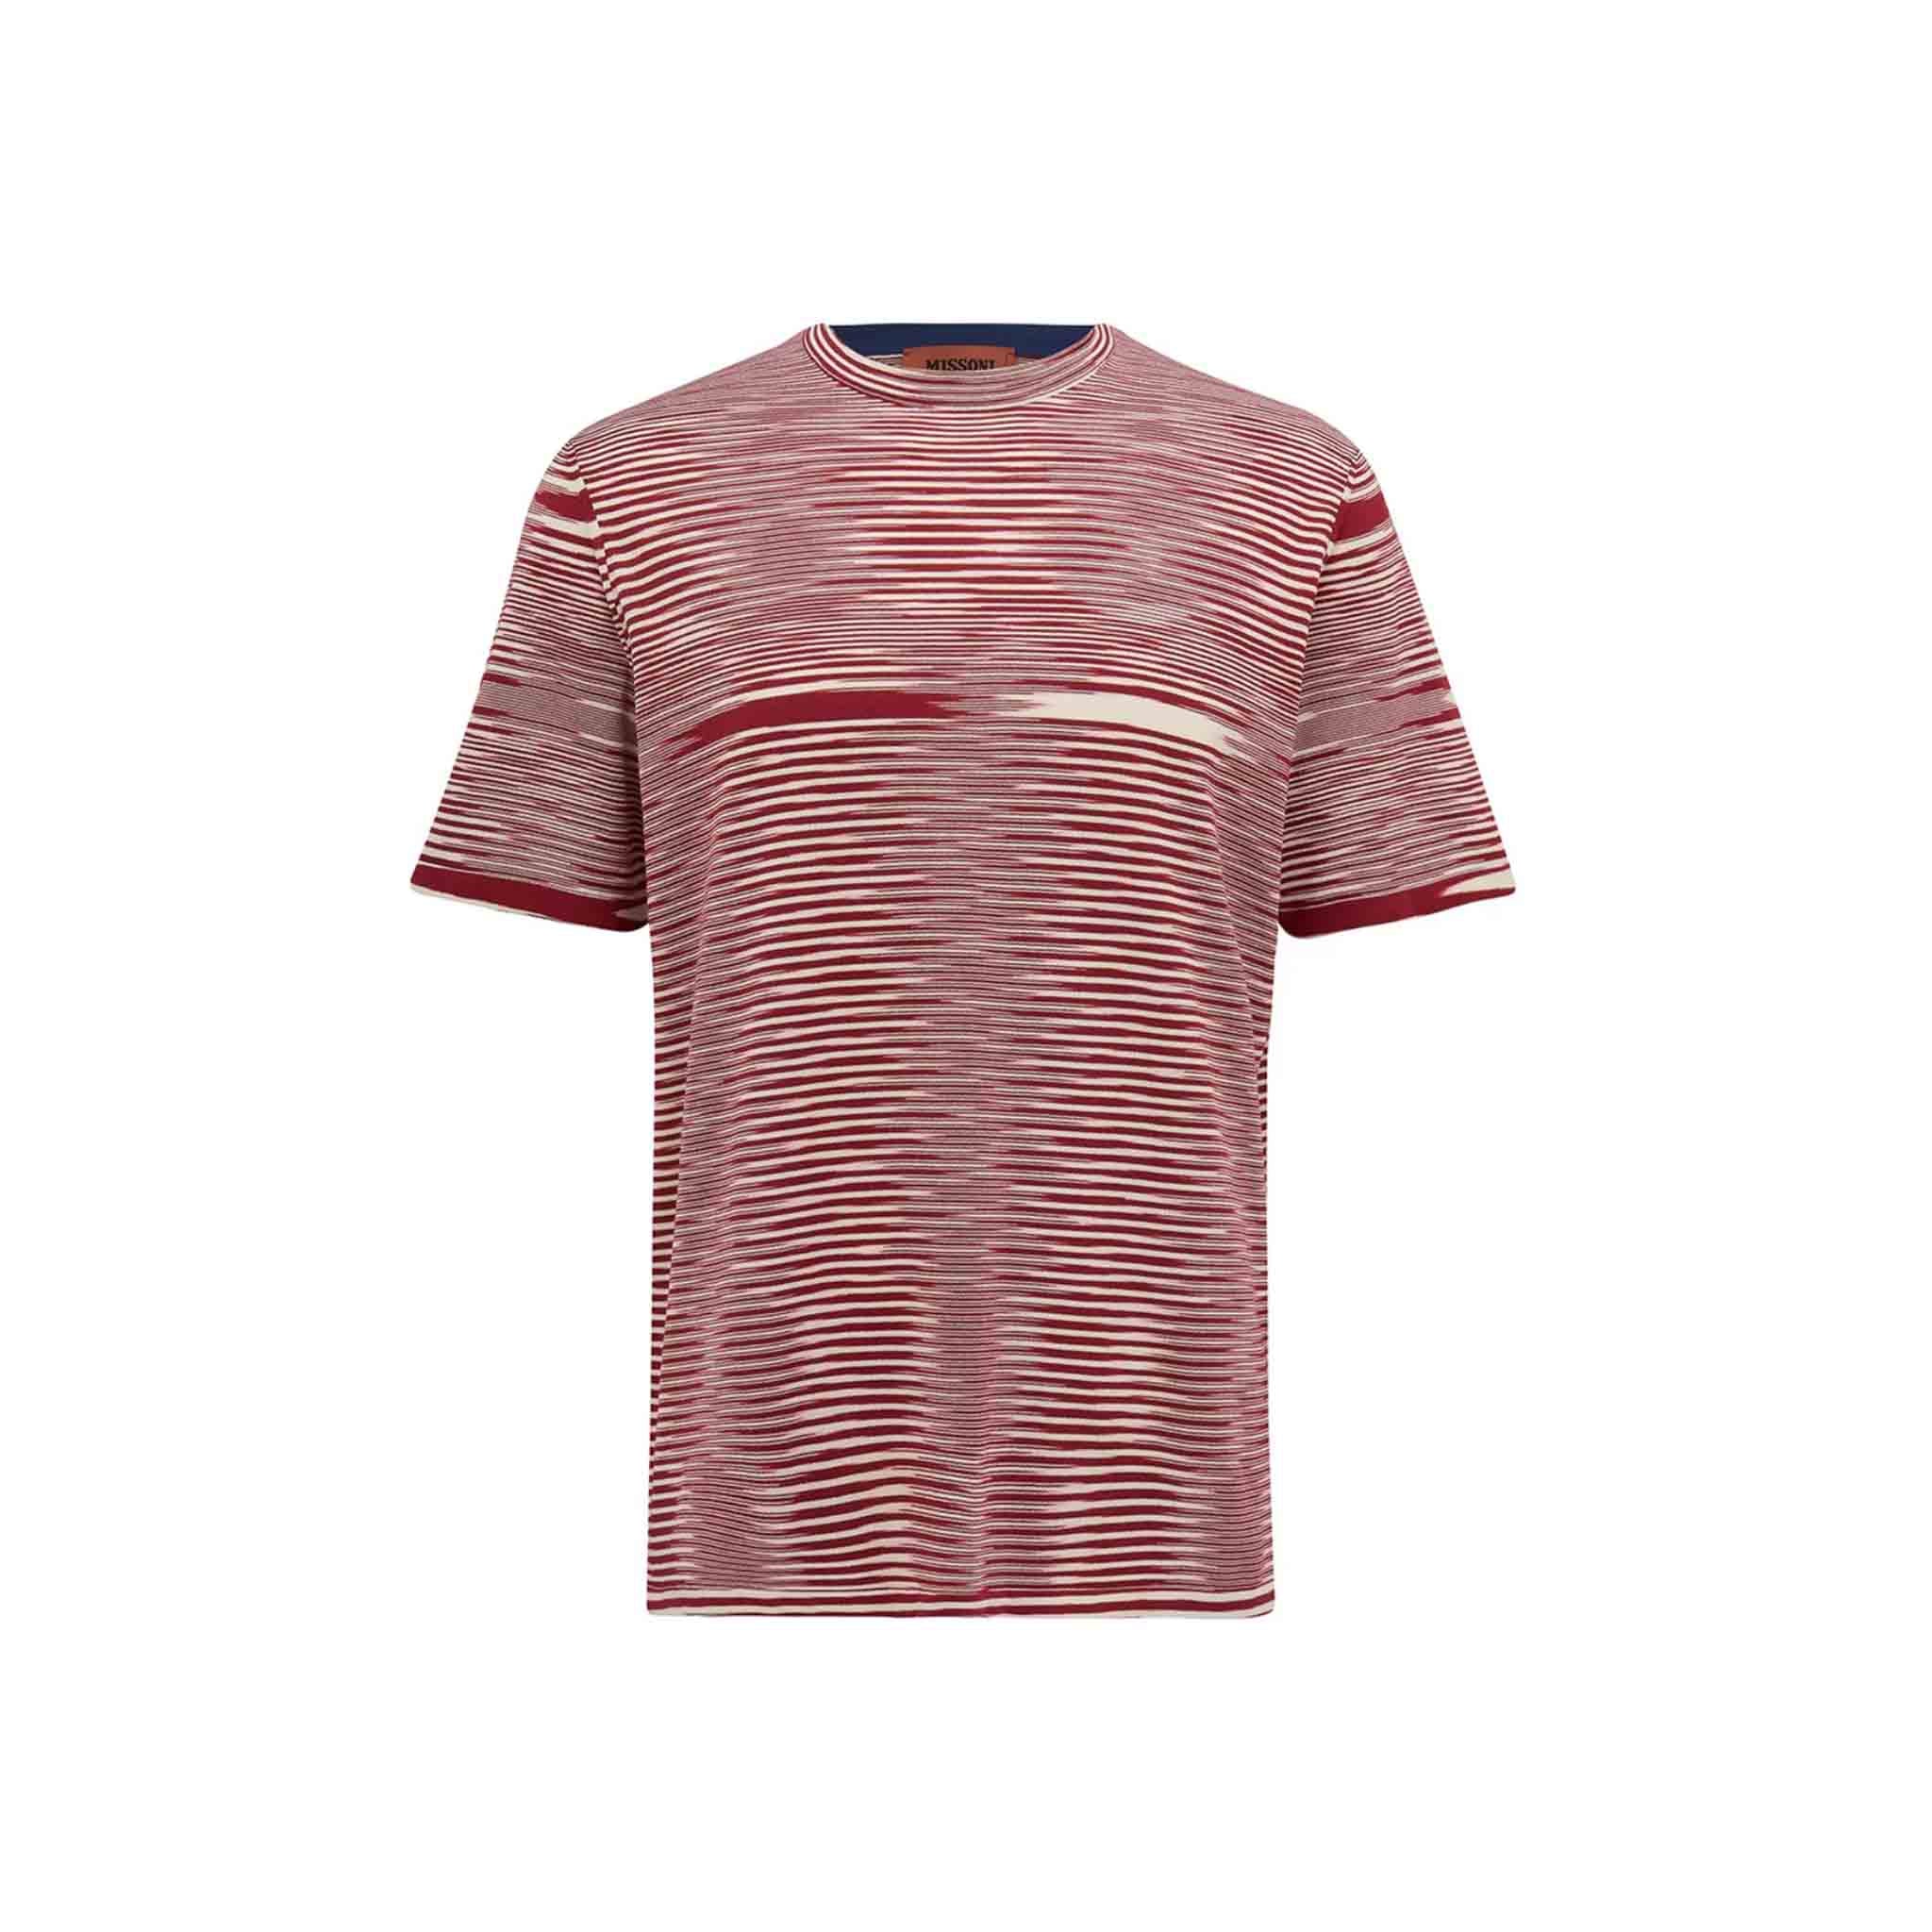 This Missoni short sleeve t-shirt features the brand's iconic striped pattern in a red and beige colorway. Made of 100% cotton, it has a comfortable, relaxed fit that is true to size. The classic crew neck design makes it perfect for any casual occasion. Whether paired with jeans or shorts, this shirt is sure to make a statement.